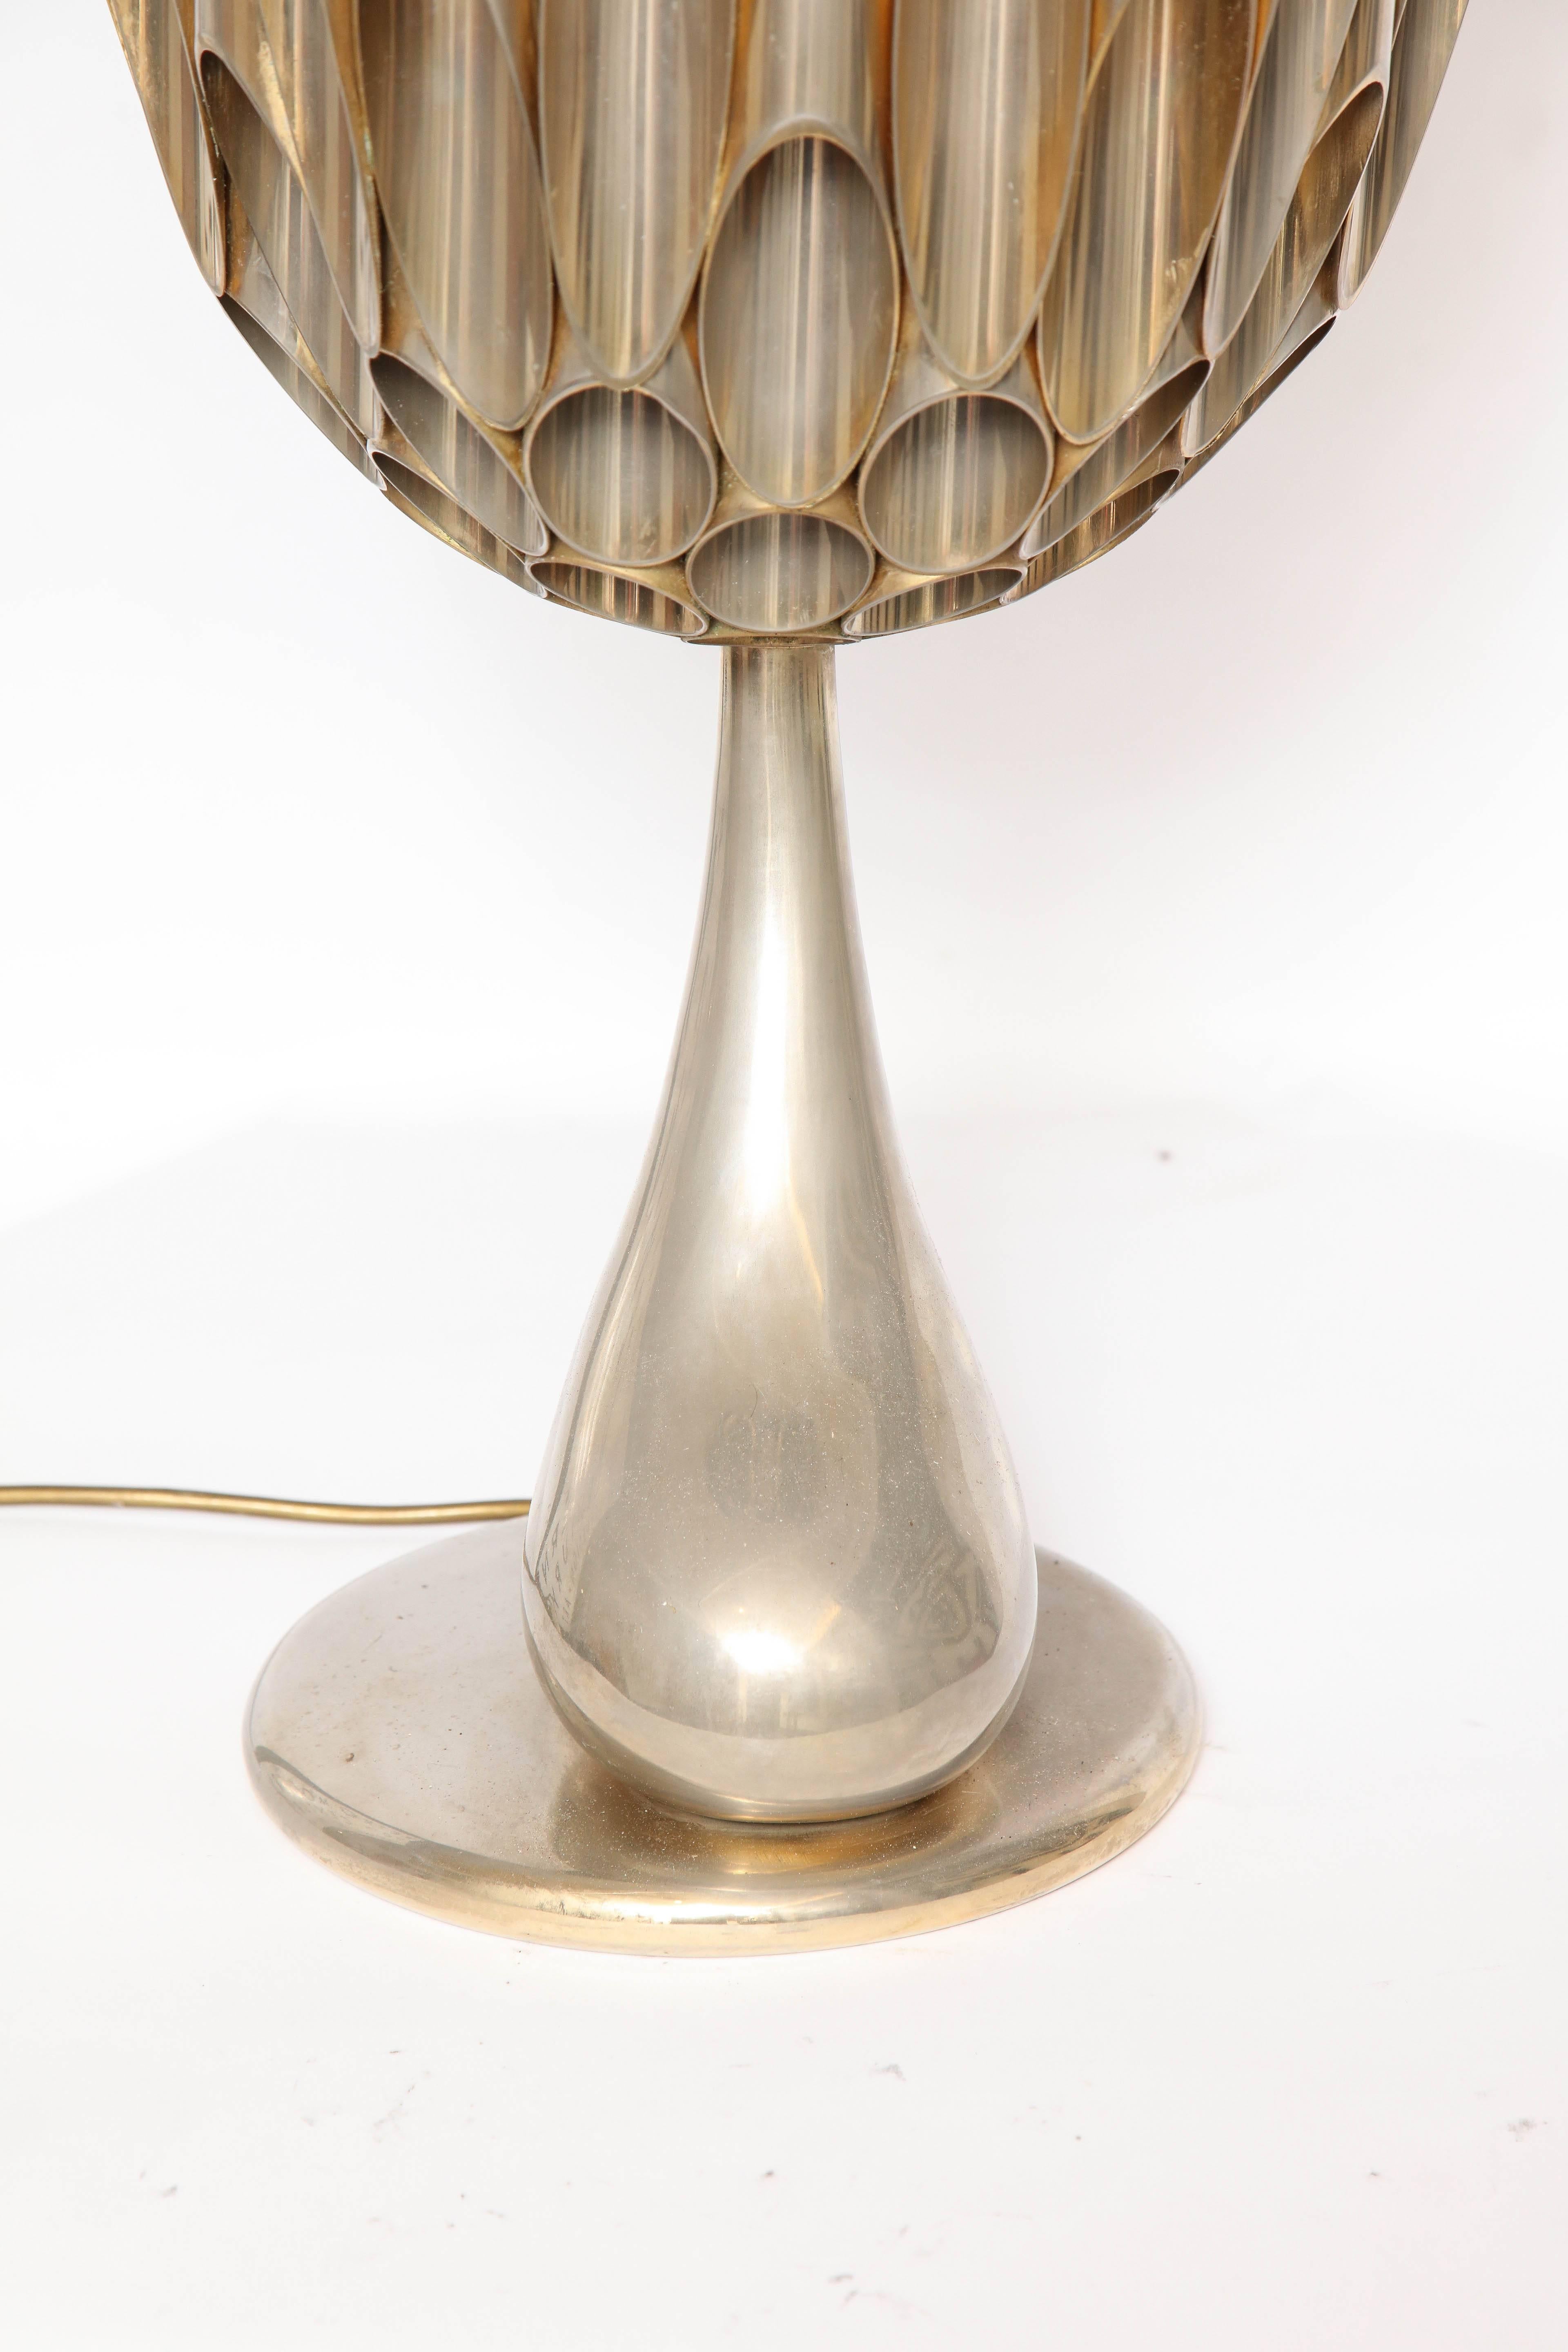 Nickel Maison Rougier Organ Pipes Sculptural Table Lamp